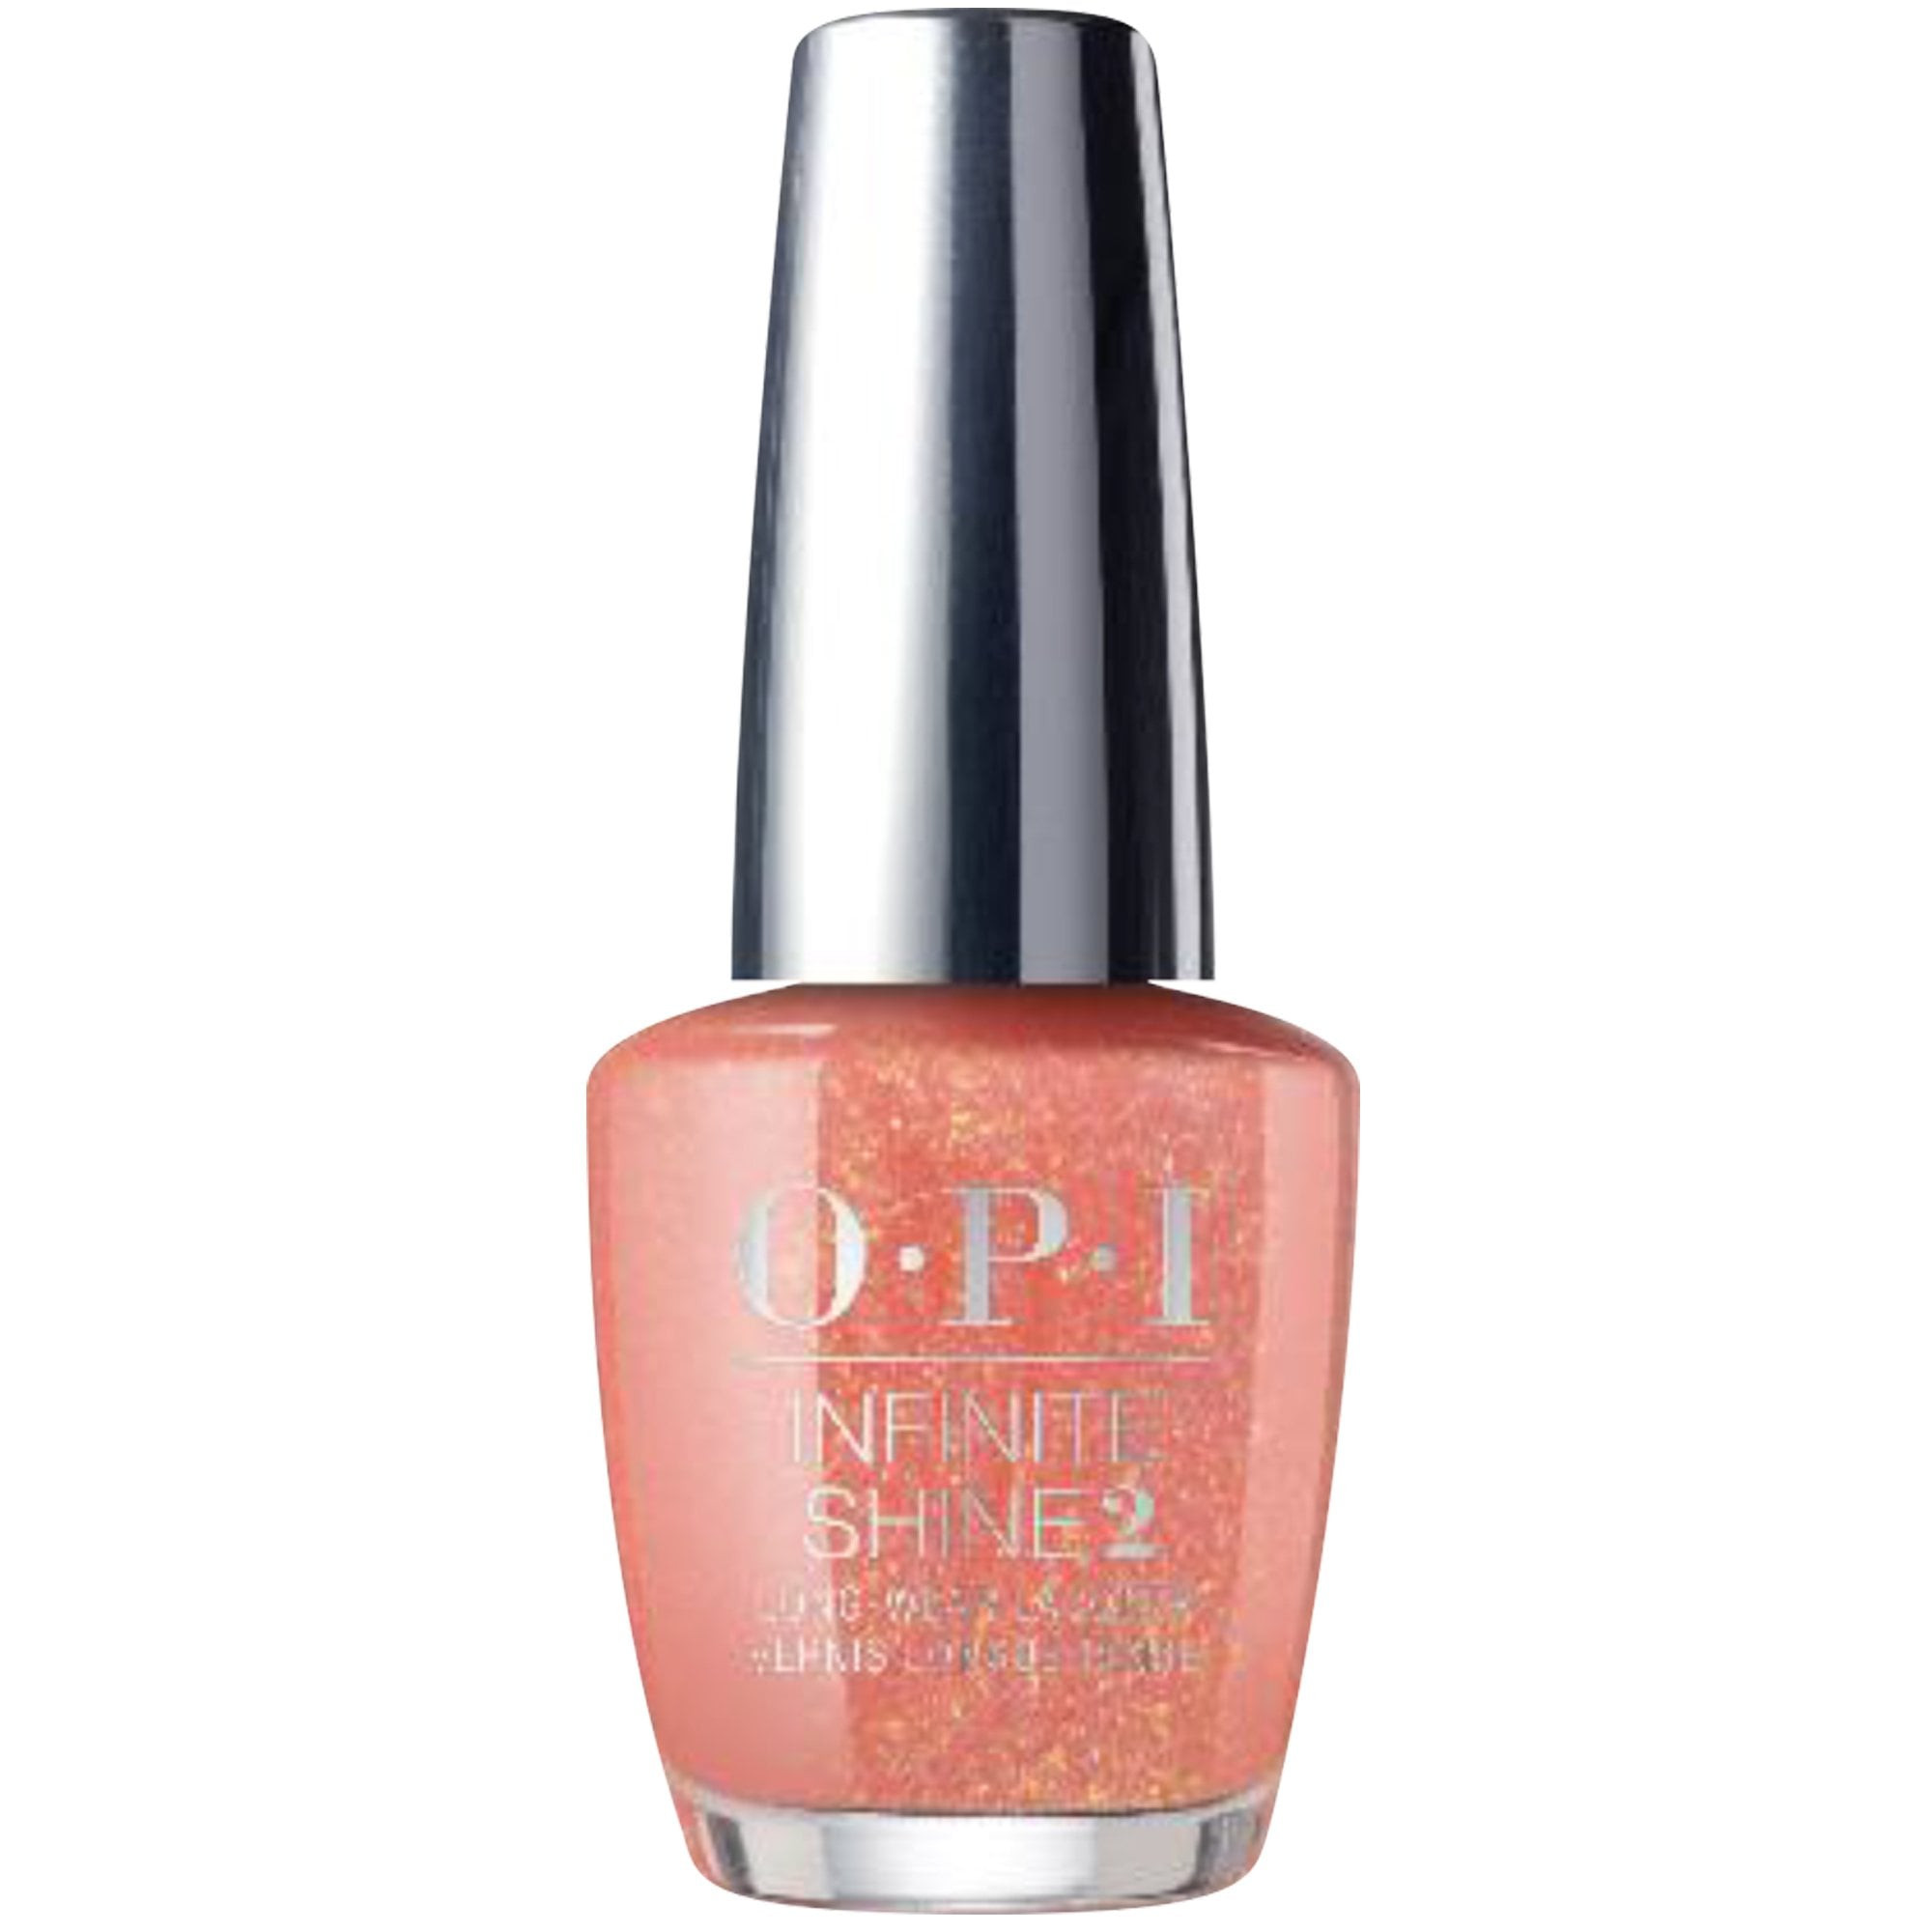 Opi Nail Colors Spring 2020
 OPI Infinite Shine Mural Mural The Wall Mexico City